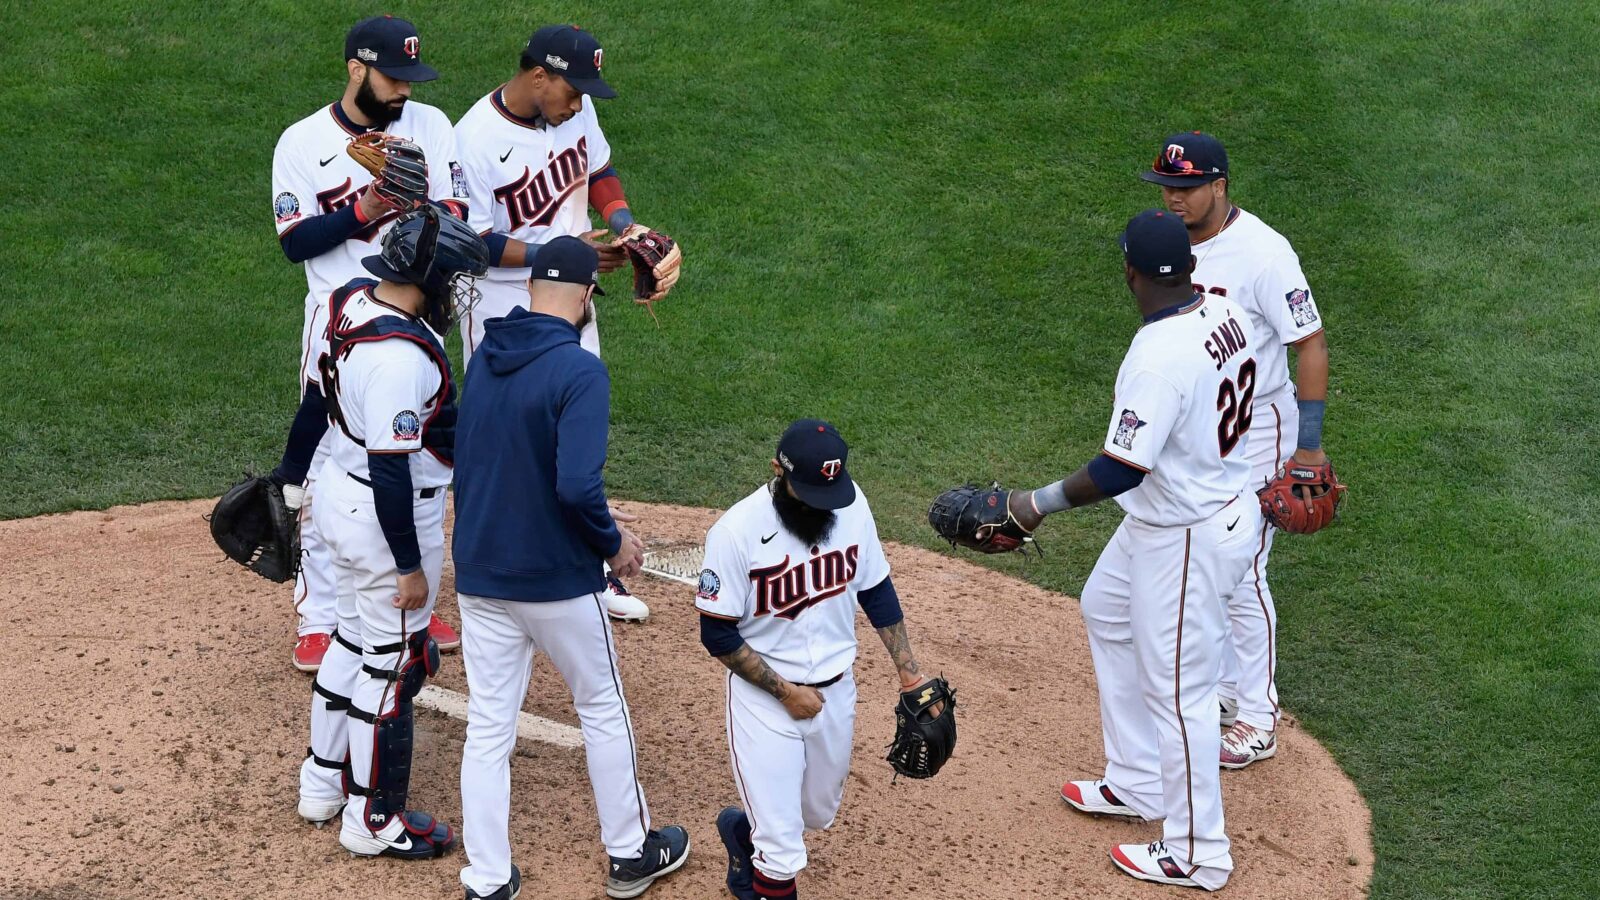 The Most Minnesota Twins Playoff Loss Ever.